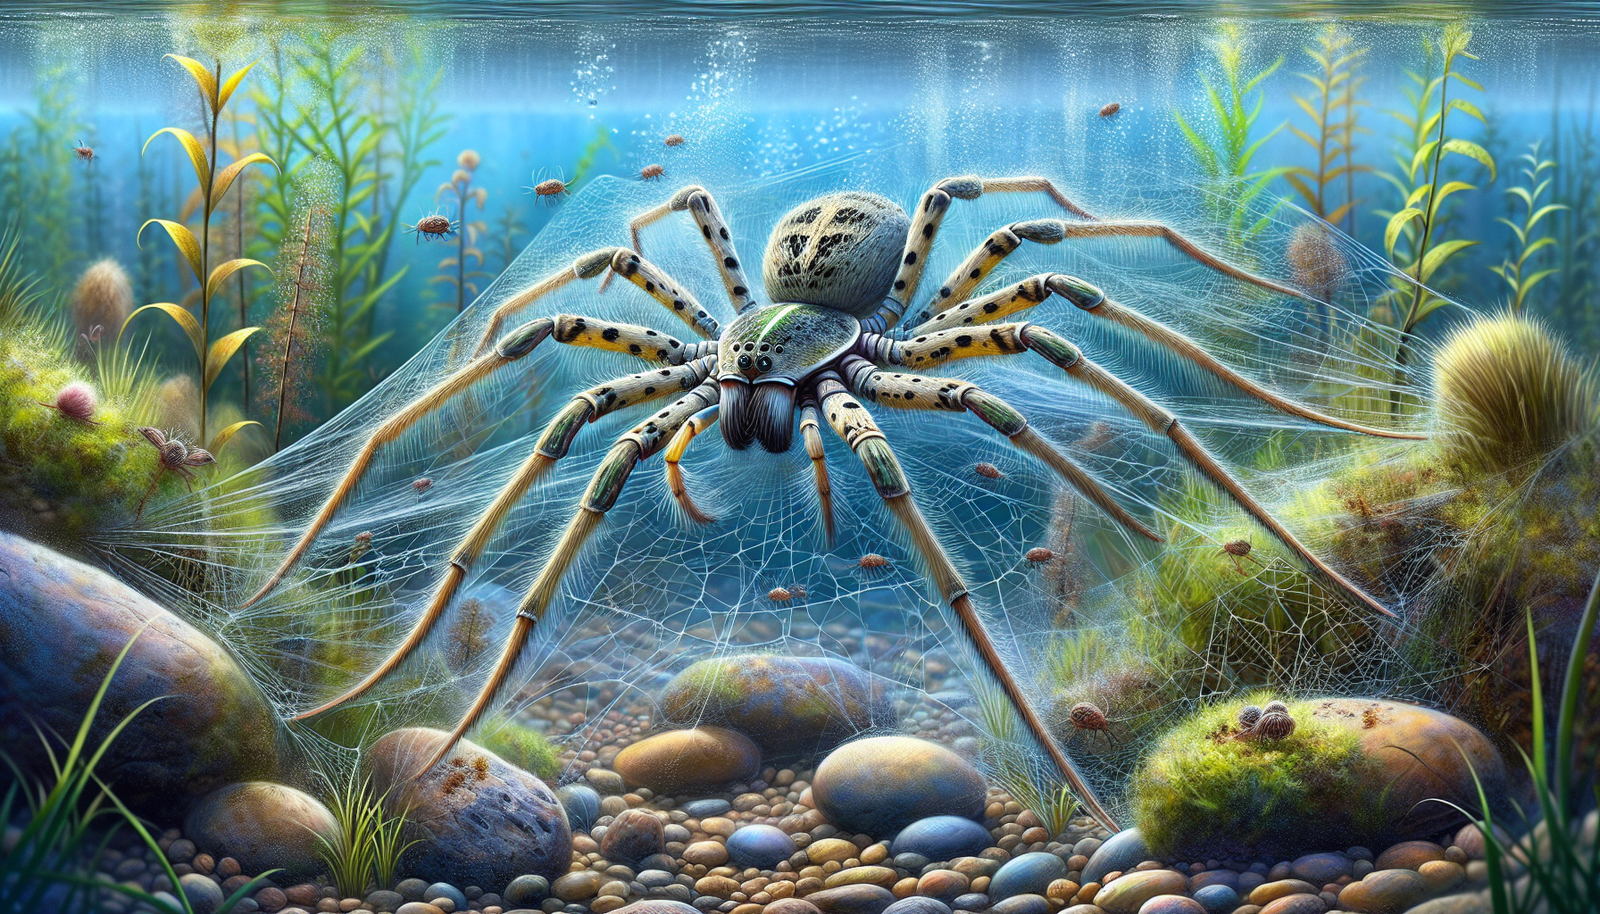 How Do You Replicate The Habitat Of The Australian Water Spider In A Captive Environment?